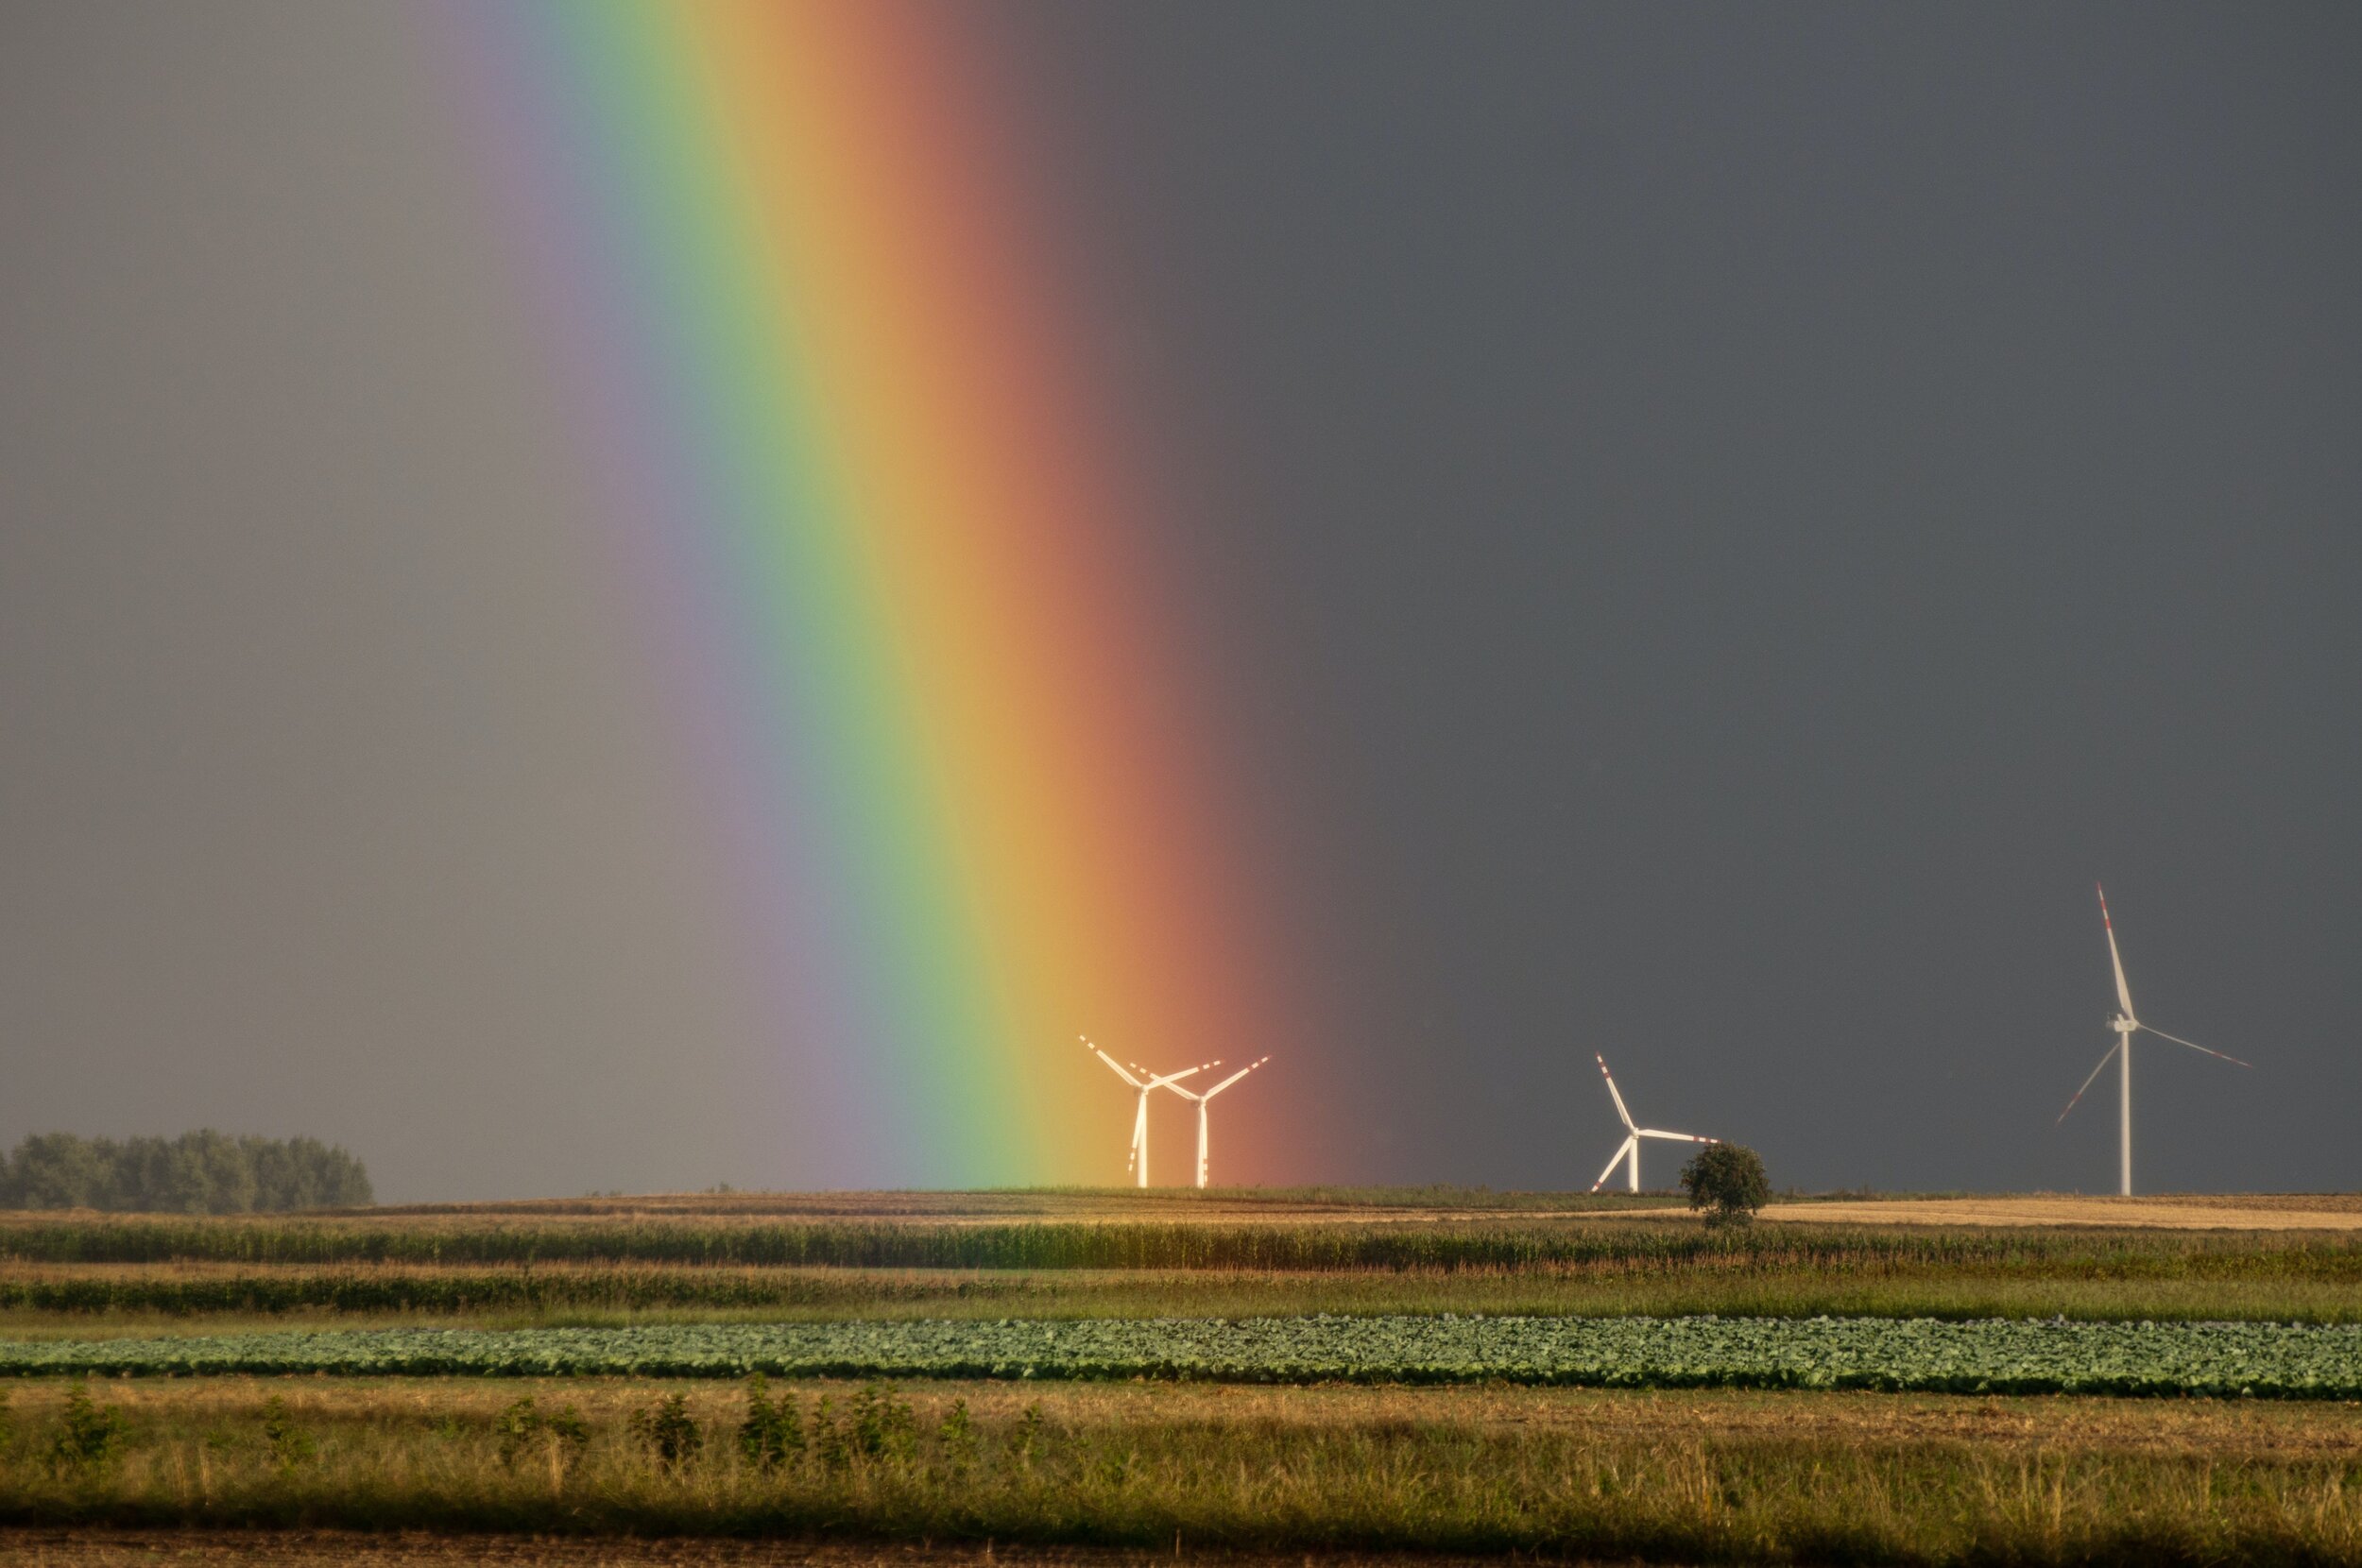 landscape-photography-of-field-with-wind-mill-with-rainbow-1253748.jpg